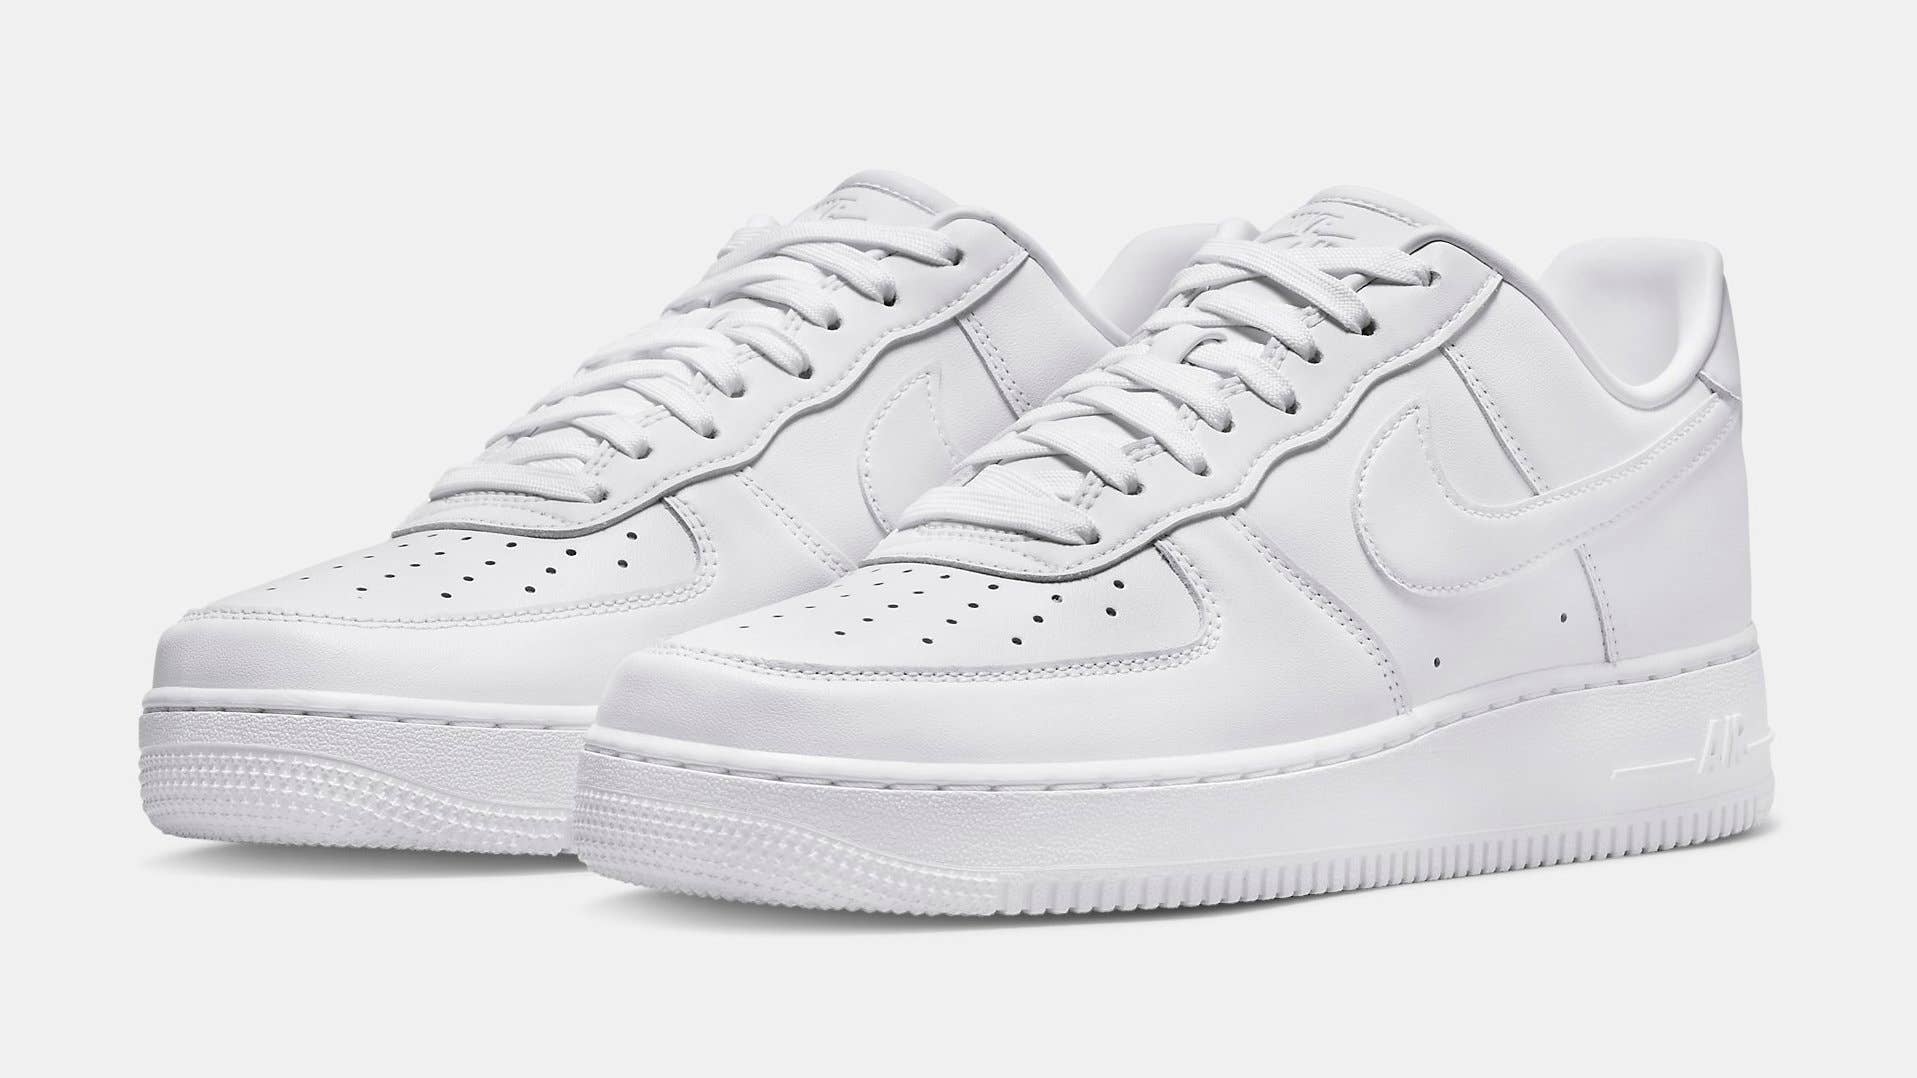 band Contract Senator Nike Says New White-on-White Air Force 1s Hide Creases | Complex